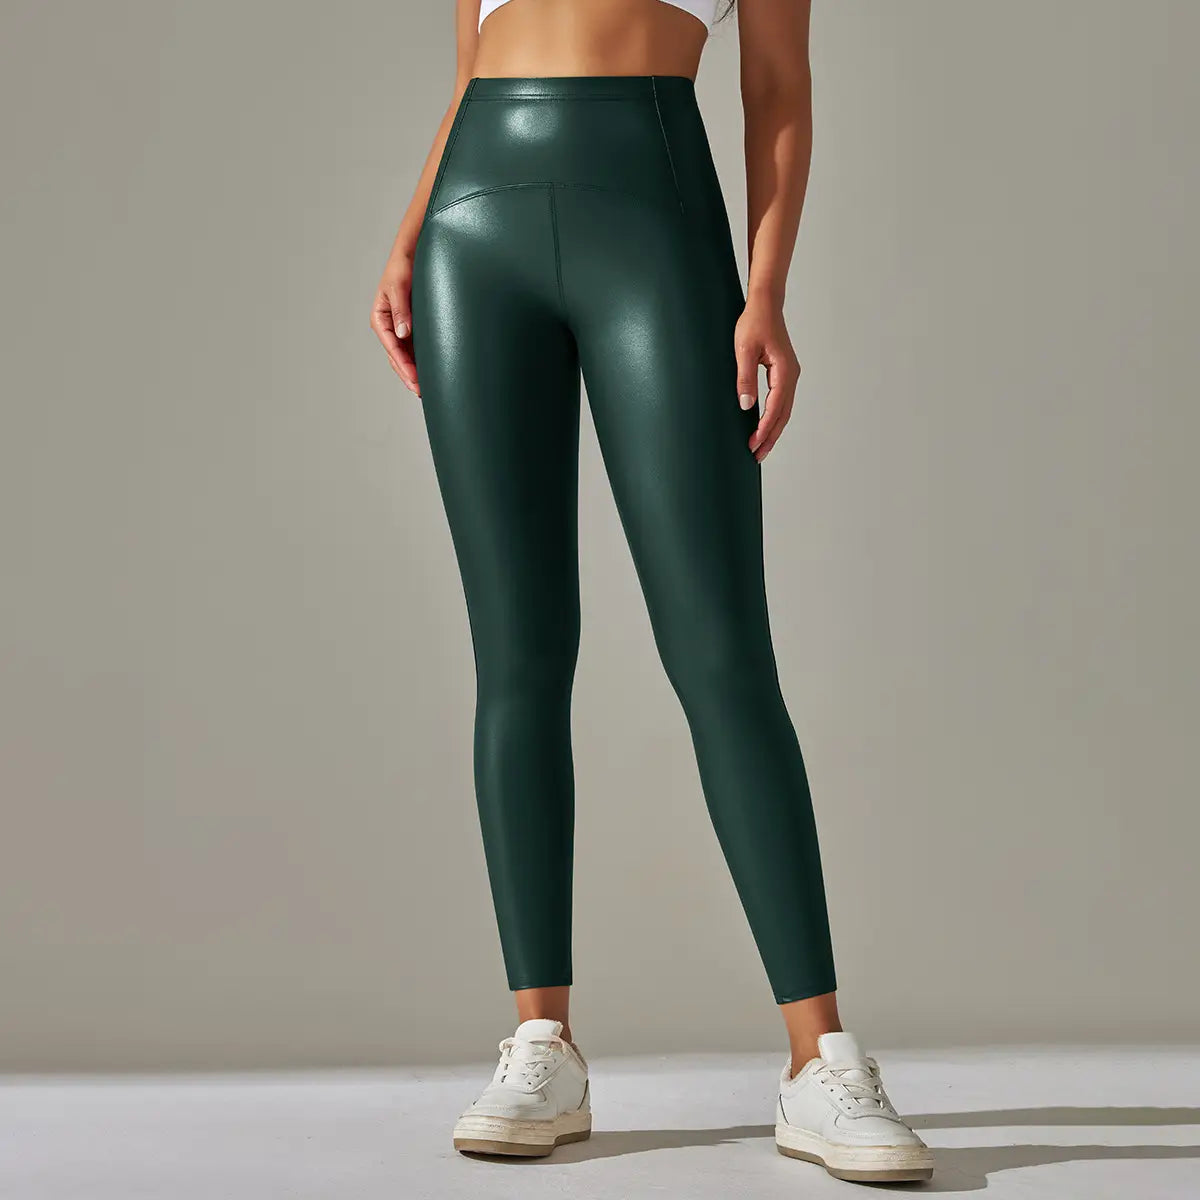 Faux Leather Leggings - High Elastic, Sporty Chic